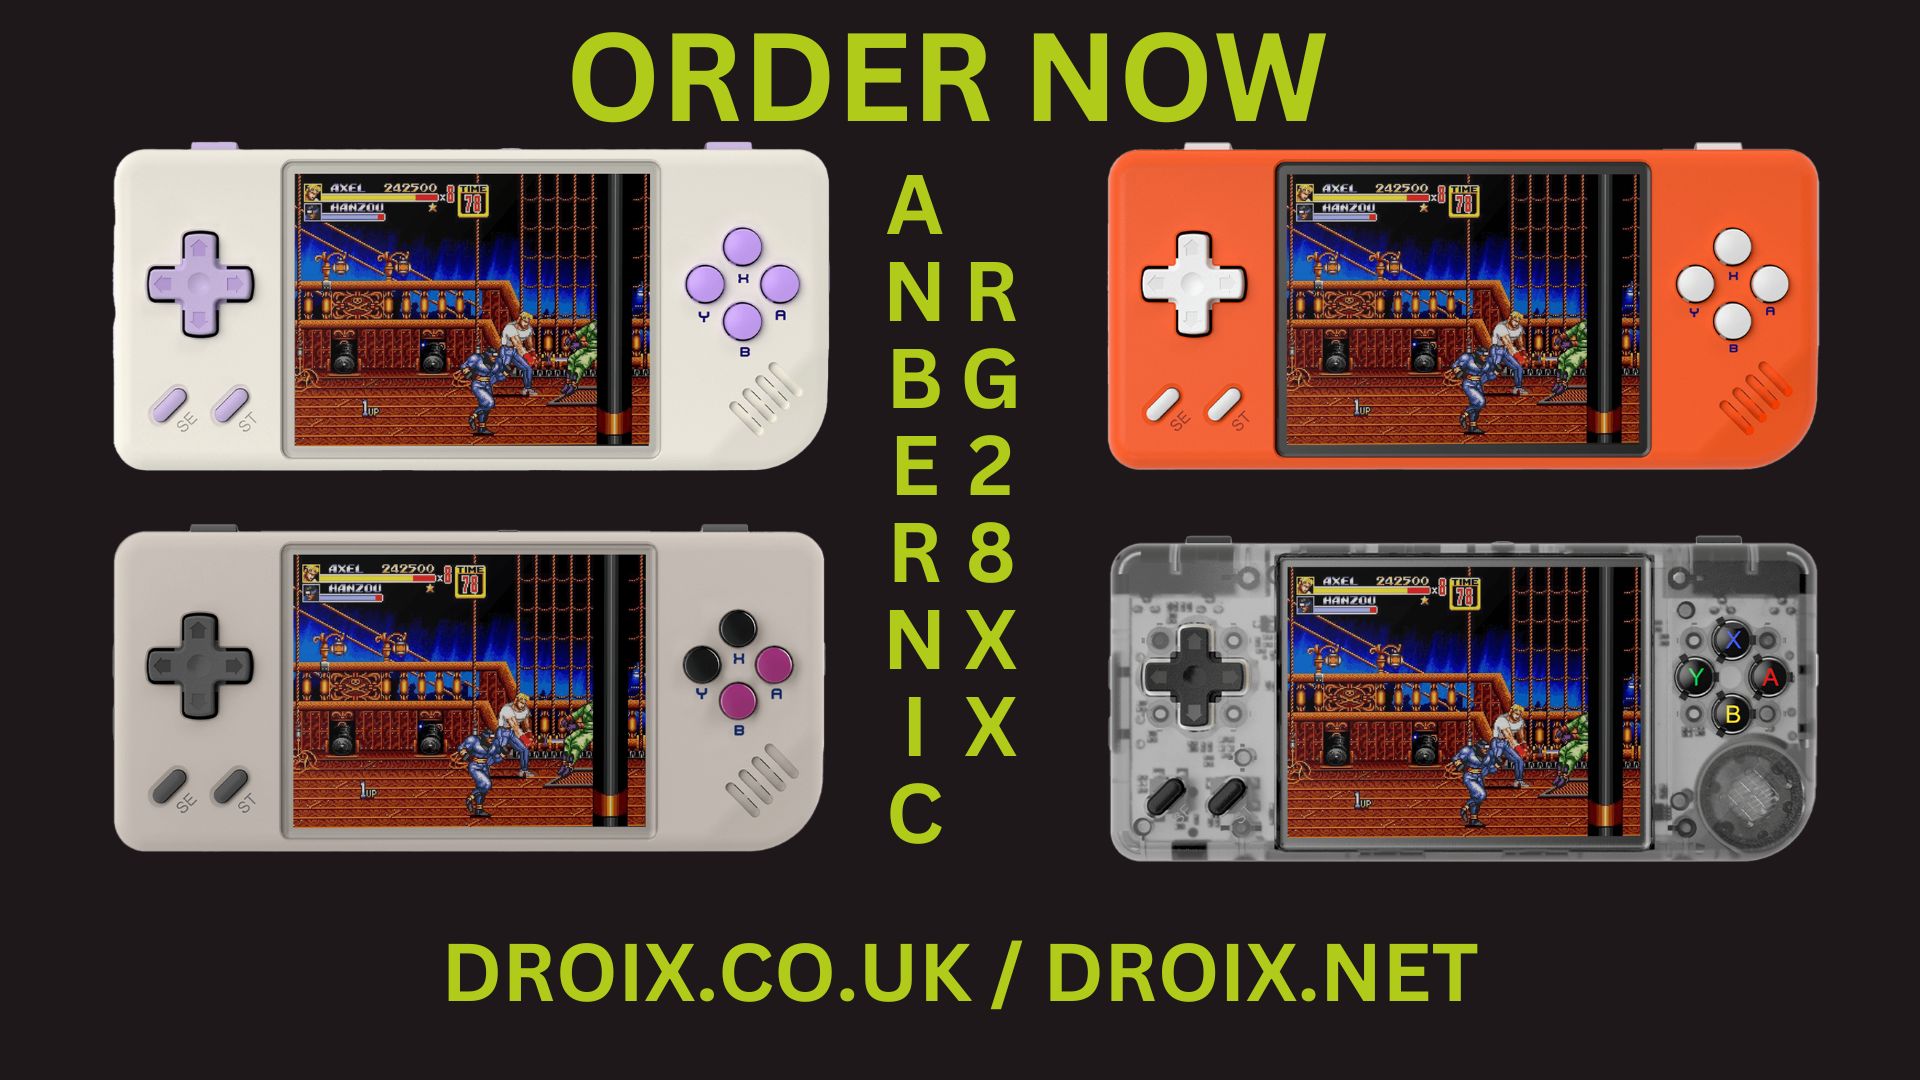 Pre-Order the Anbernic RG28XX Now at DroiX